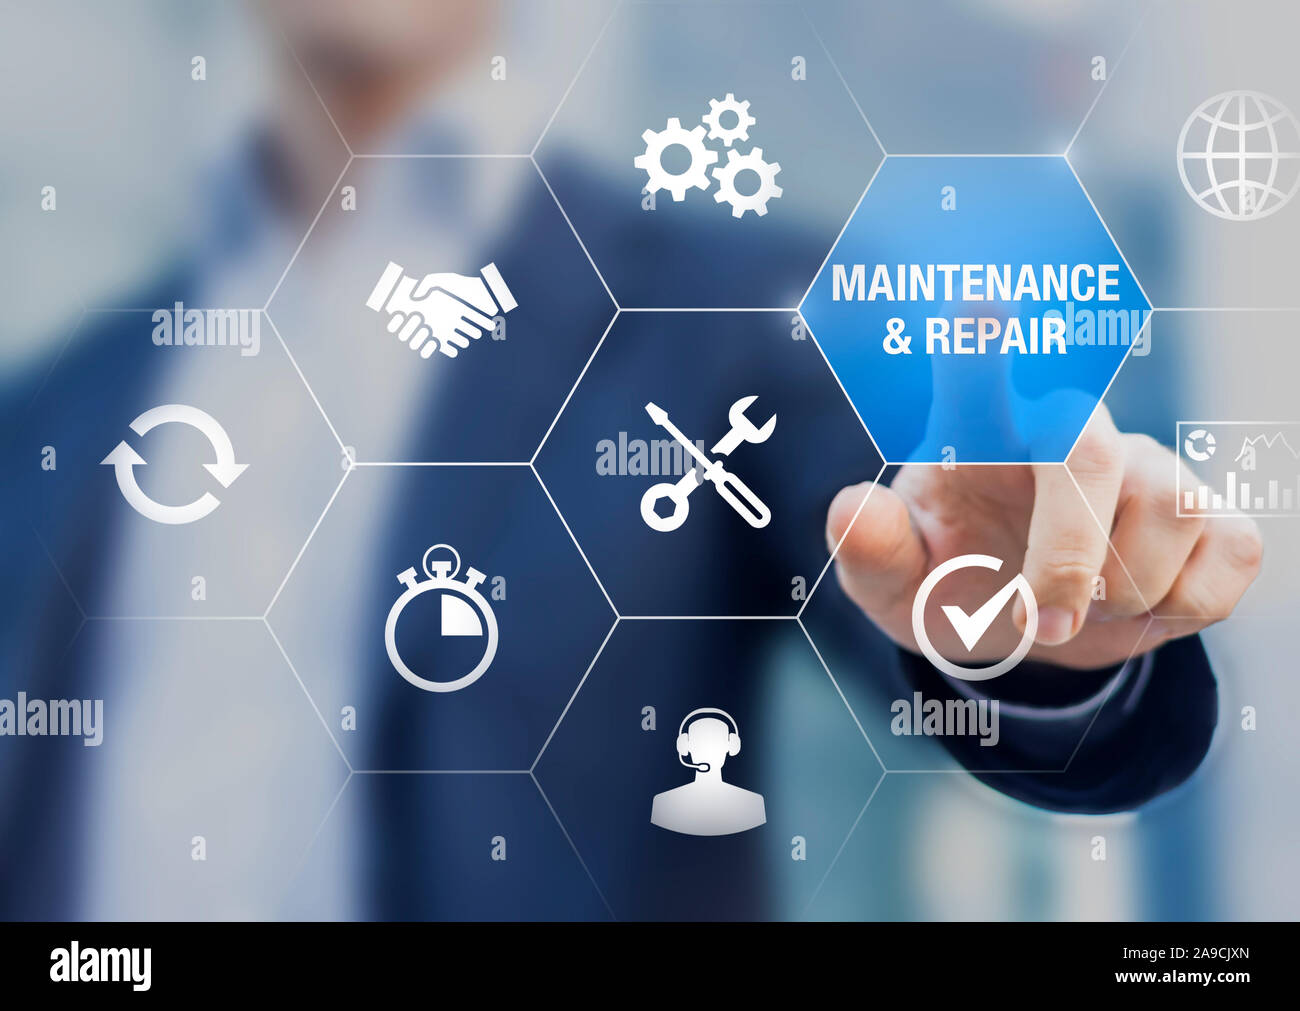 Maintenance and repair concept with icons about assistance and servicing of equipments, person touching symbols Stock Photo